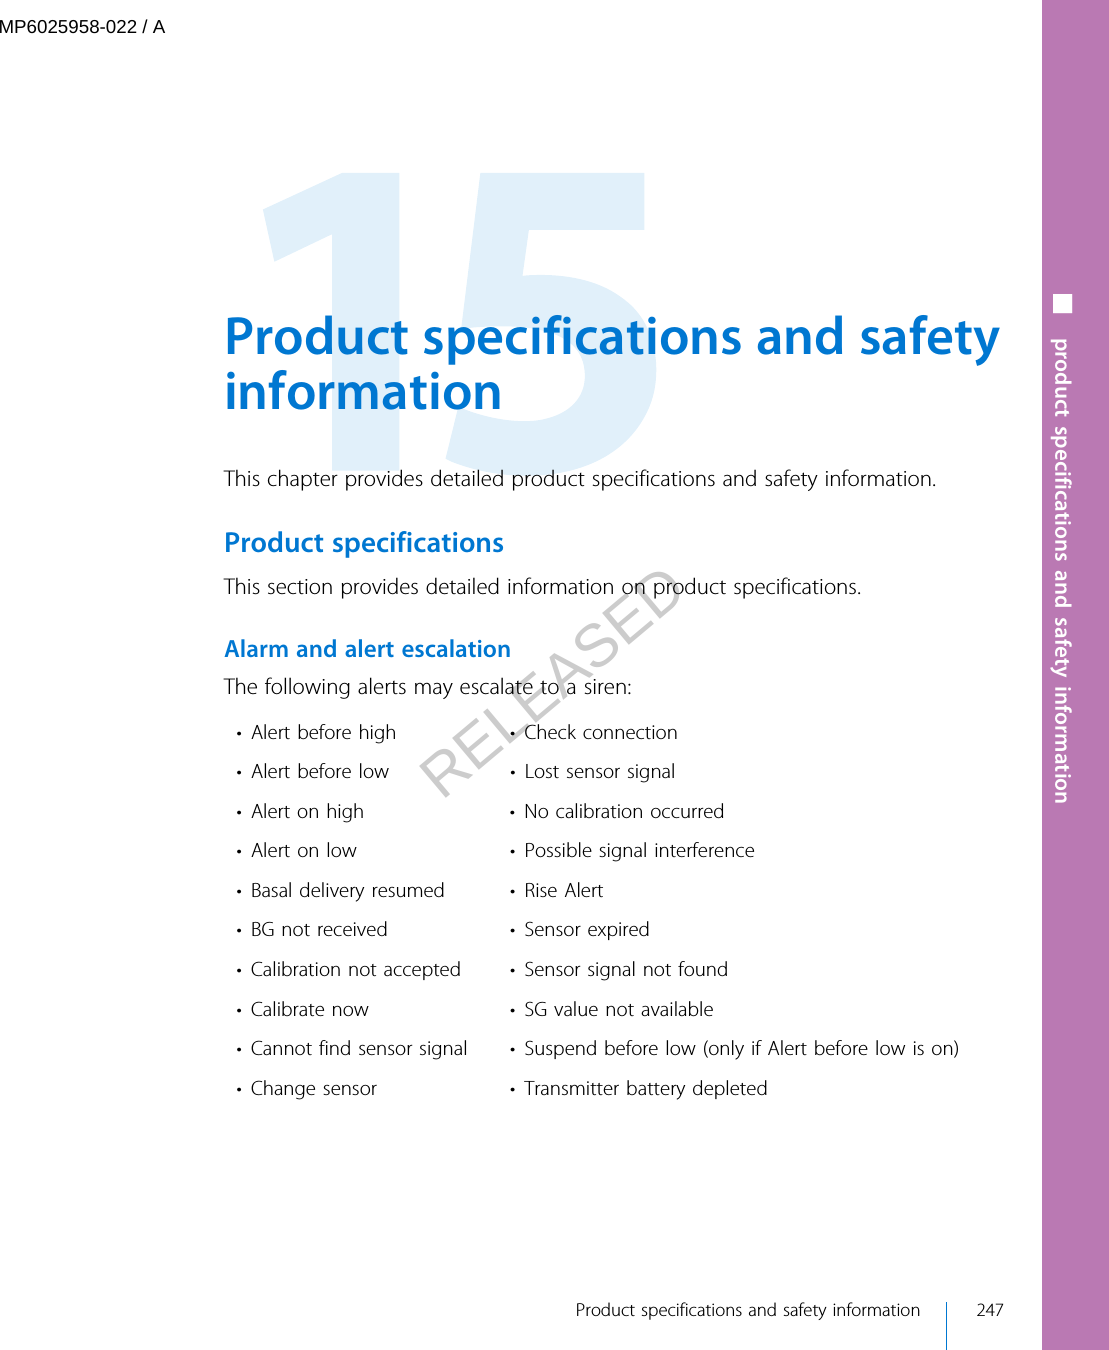  Product specifications and safetyinformationThis chapter provides detailed product specifications and safety information.Product specificationsThis section provides detailed information on product specifications.Alarm and alert escalationThe following alerts may escalate to a siren:• Alert before high • Check connection• Alert before low • Lost sensor signal• Alert on high • No calibration occurred• Alert on low • Possible signal interference• Basal delivery resumed • Rise Alert• BG not received • Sensor expired• Calibration not accepted • Sensor signal not found• Calibrate now • SG value not available• Cannot find sensor signal • Suspend before low (only if Alert before low is on)• Change sensor • Transmitter battery depleted Product specifications and safety information 247■ product specifications and safety informationMP6025958-022 / ARELEASED